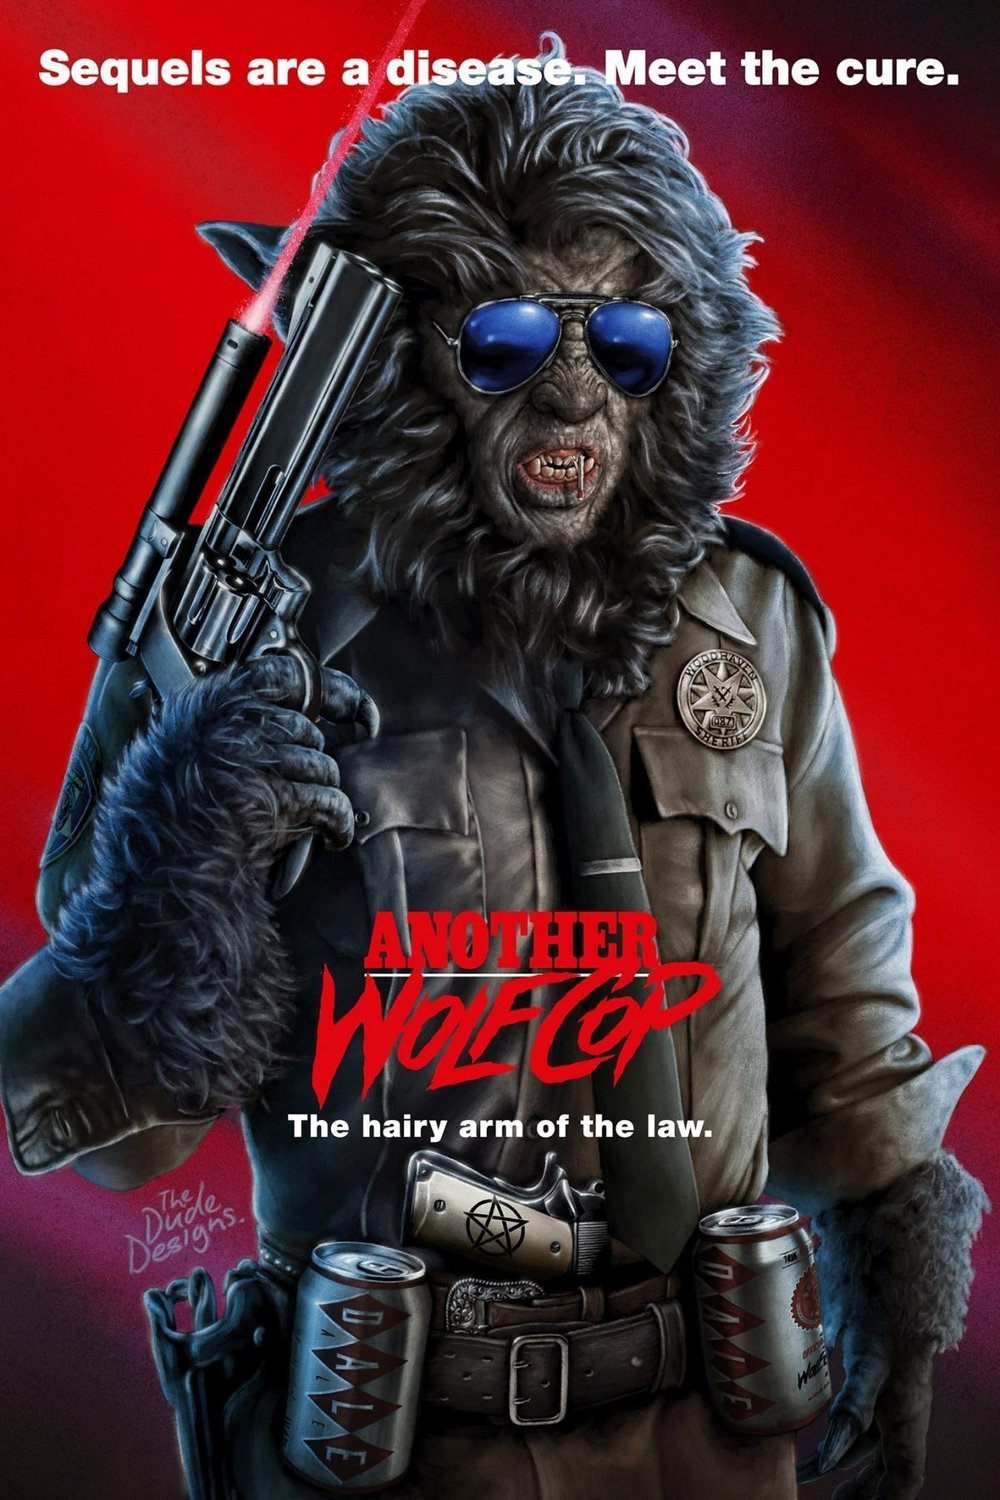 Poster of the movie Another WolfCop